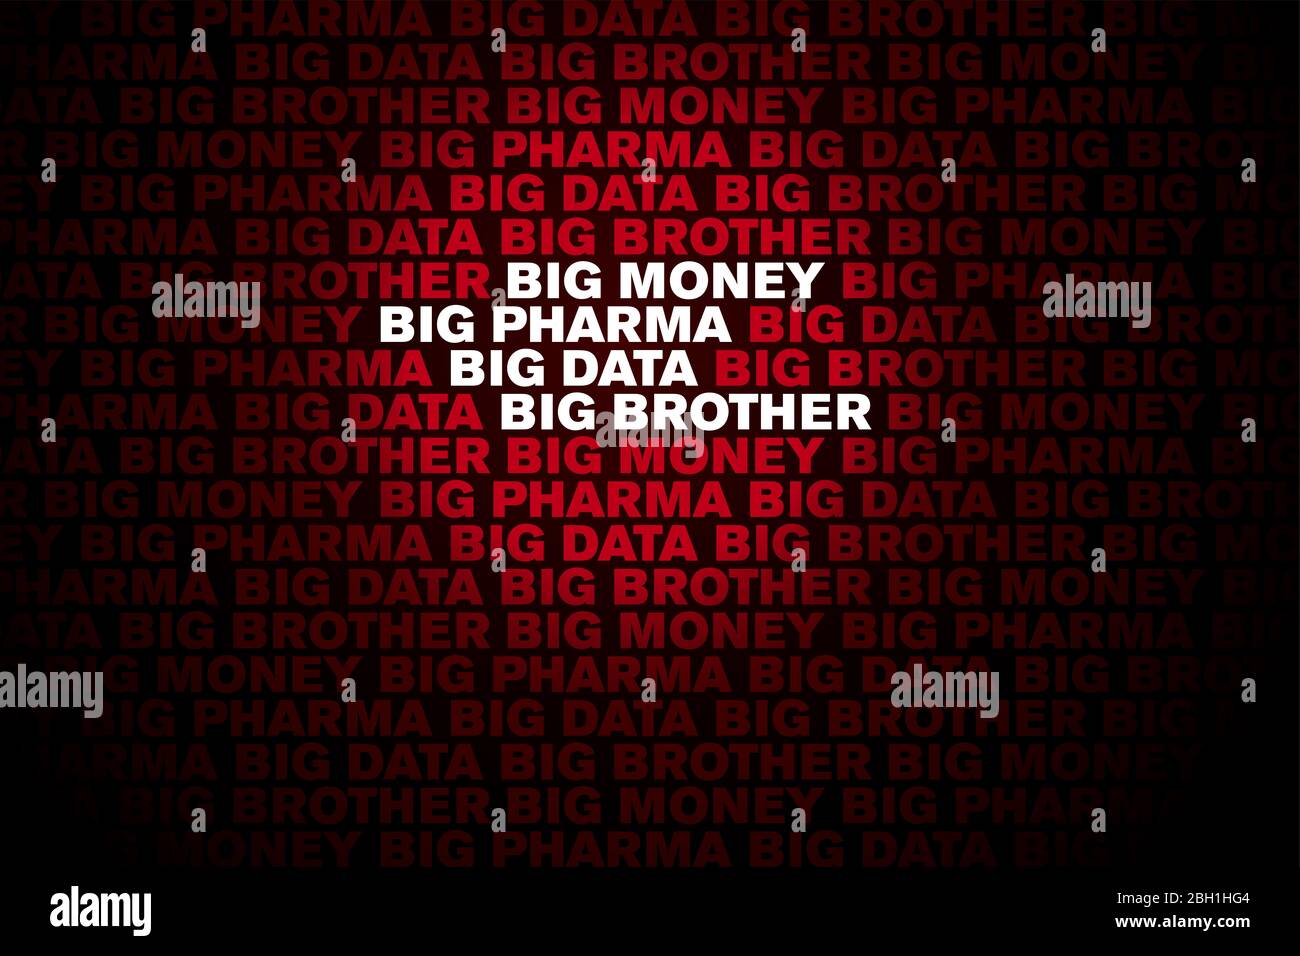 Big Pharma, Big Money, Data and Big Brother lettering background. Words shown in capital letters. Bold white and red letters on black background. Stock Photo